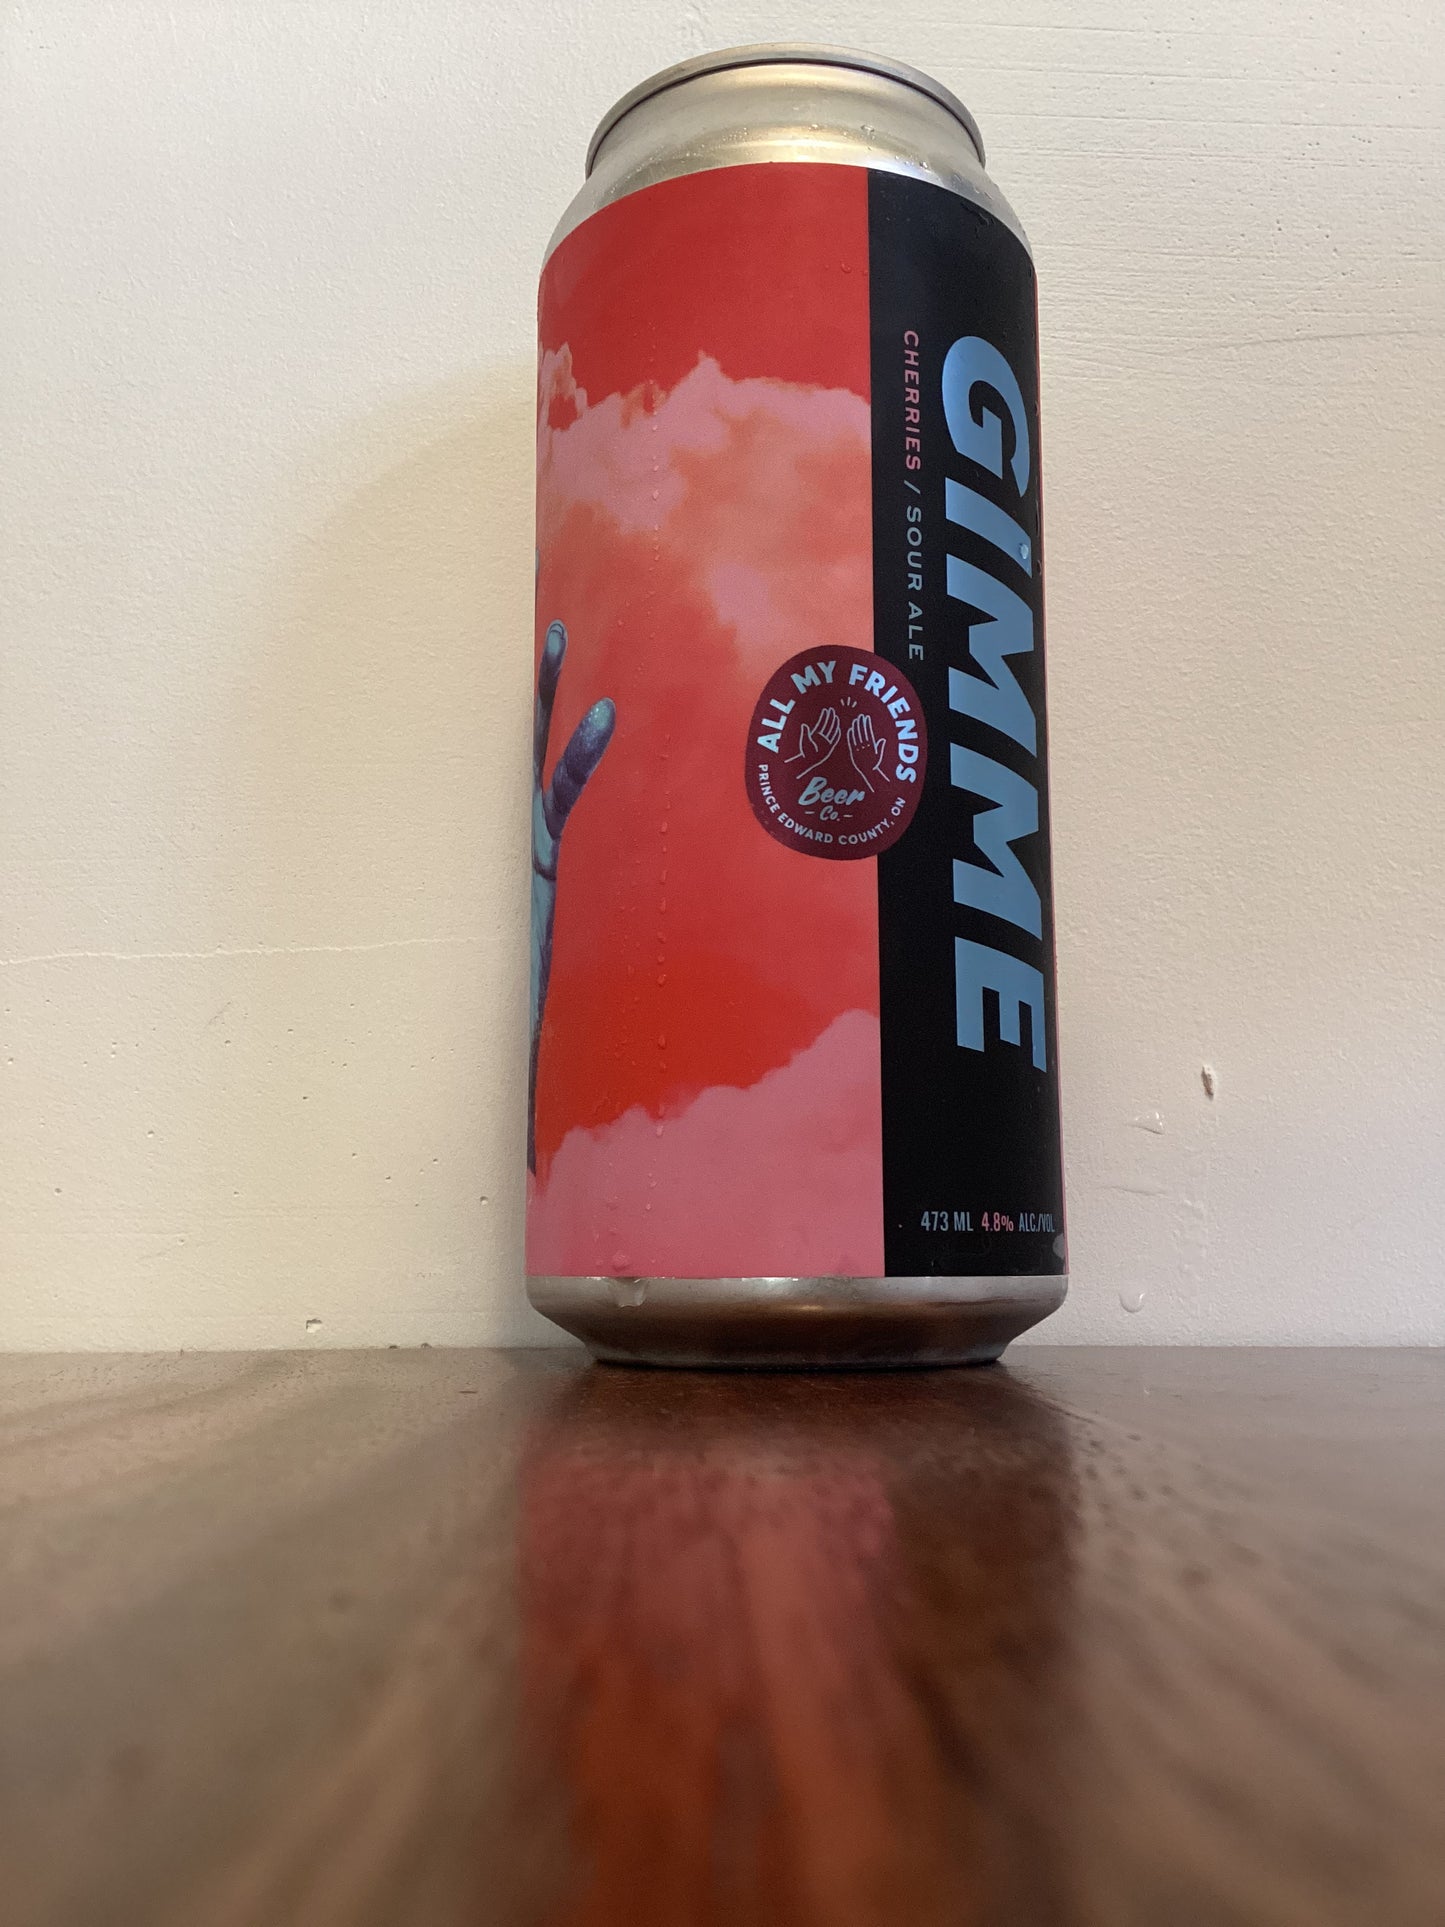 ALL MY FRIENDS BREWING GIMME with Cherries Sour Ale (473 ml)